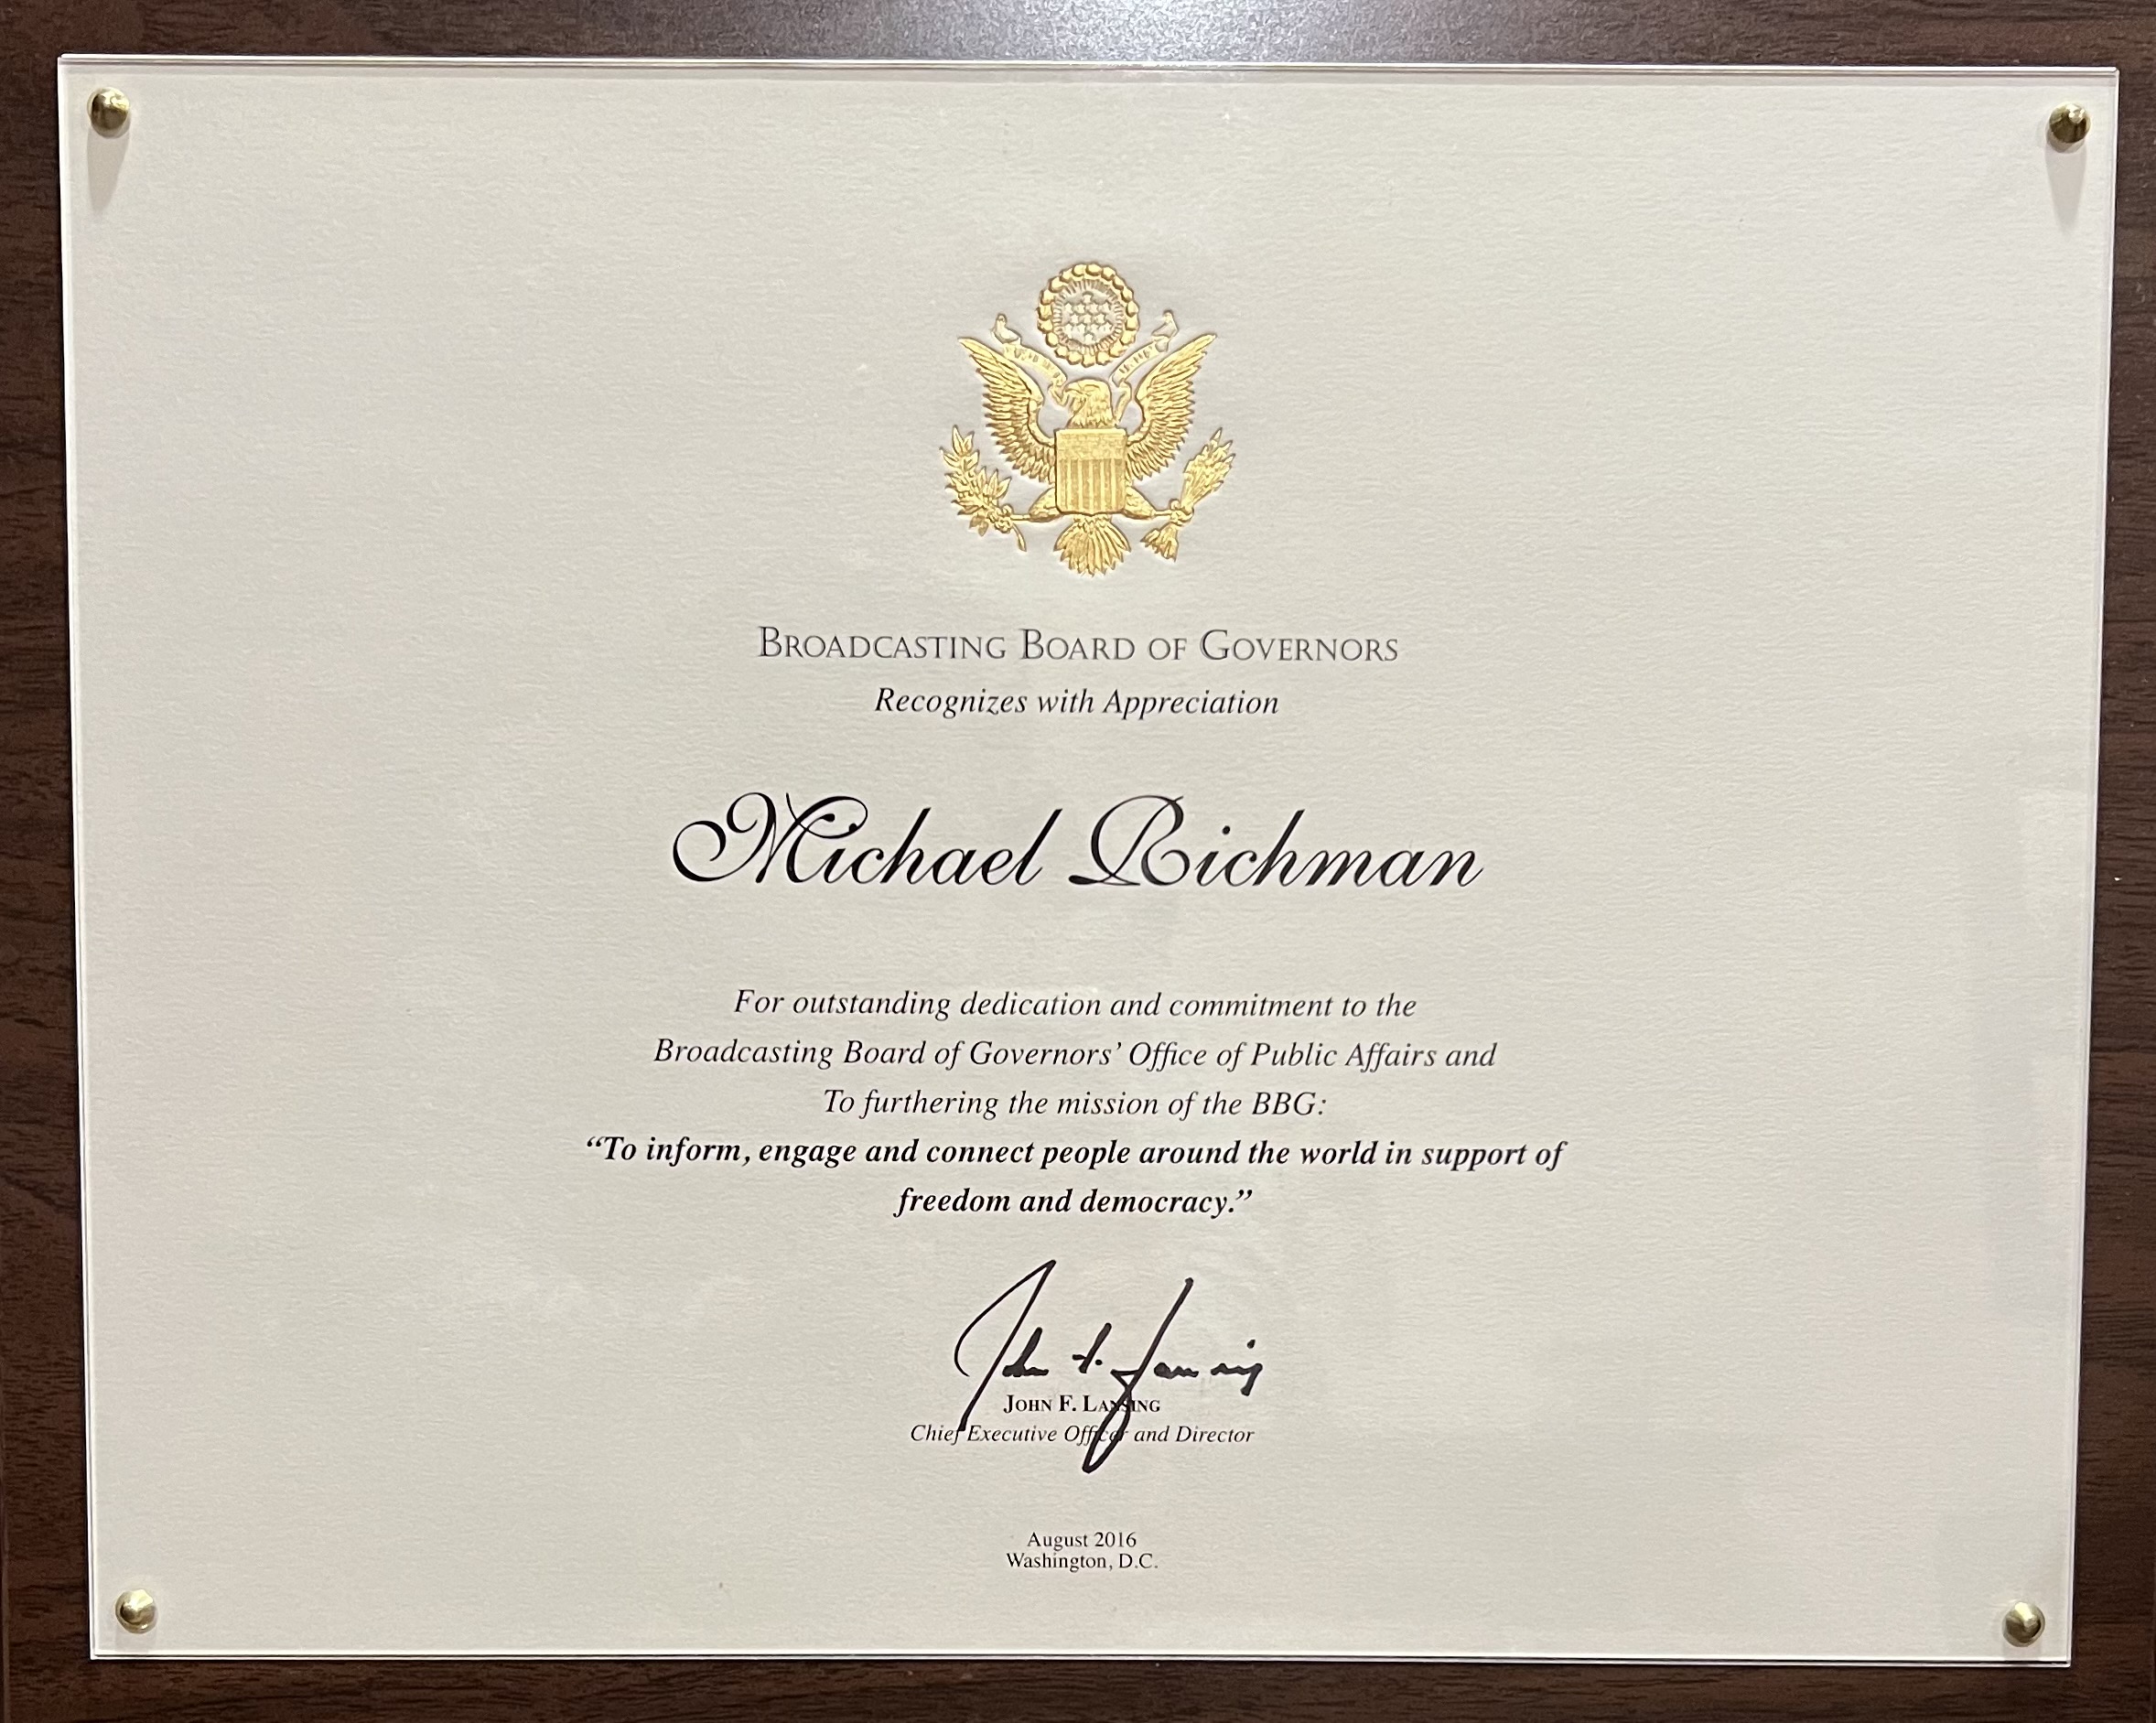 The Broadcasting Board of Governors, the U.S. government body that oversees the Voice of America and other U.S.-funded broadcast agencies, presented Mike Richman with a plaque in 2016 for his "outstanding dedication and commitment" to the BBG's Office of Public Affairs.